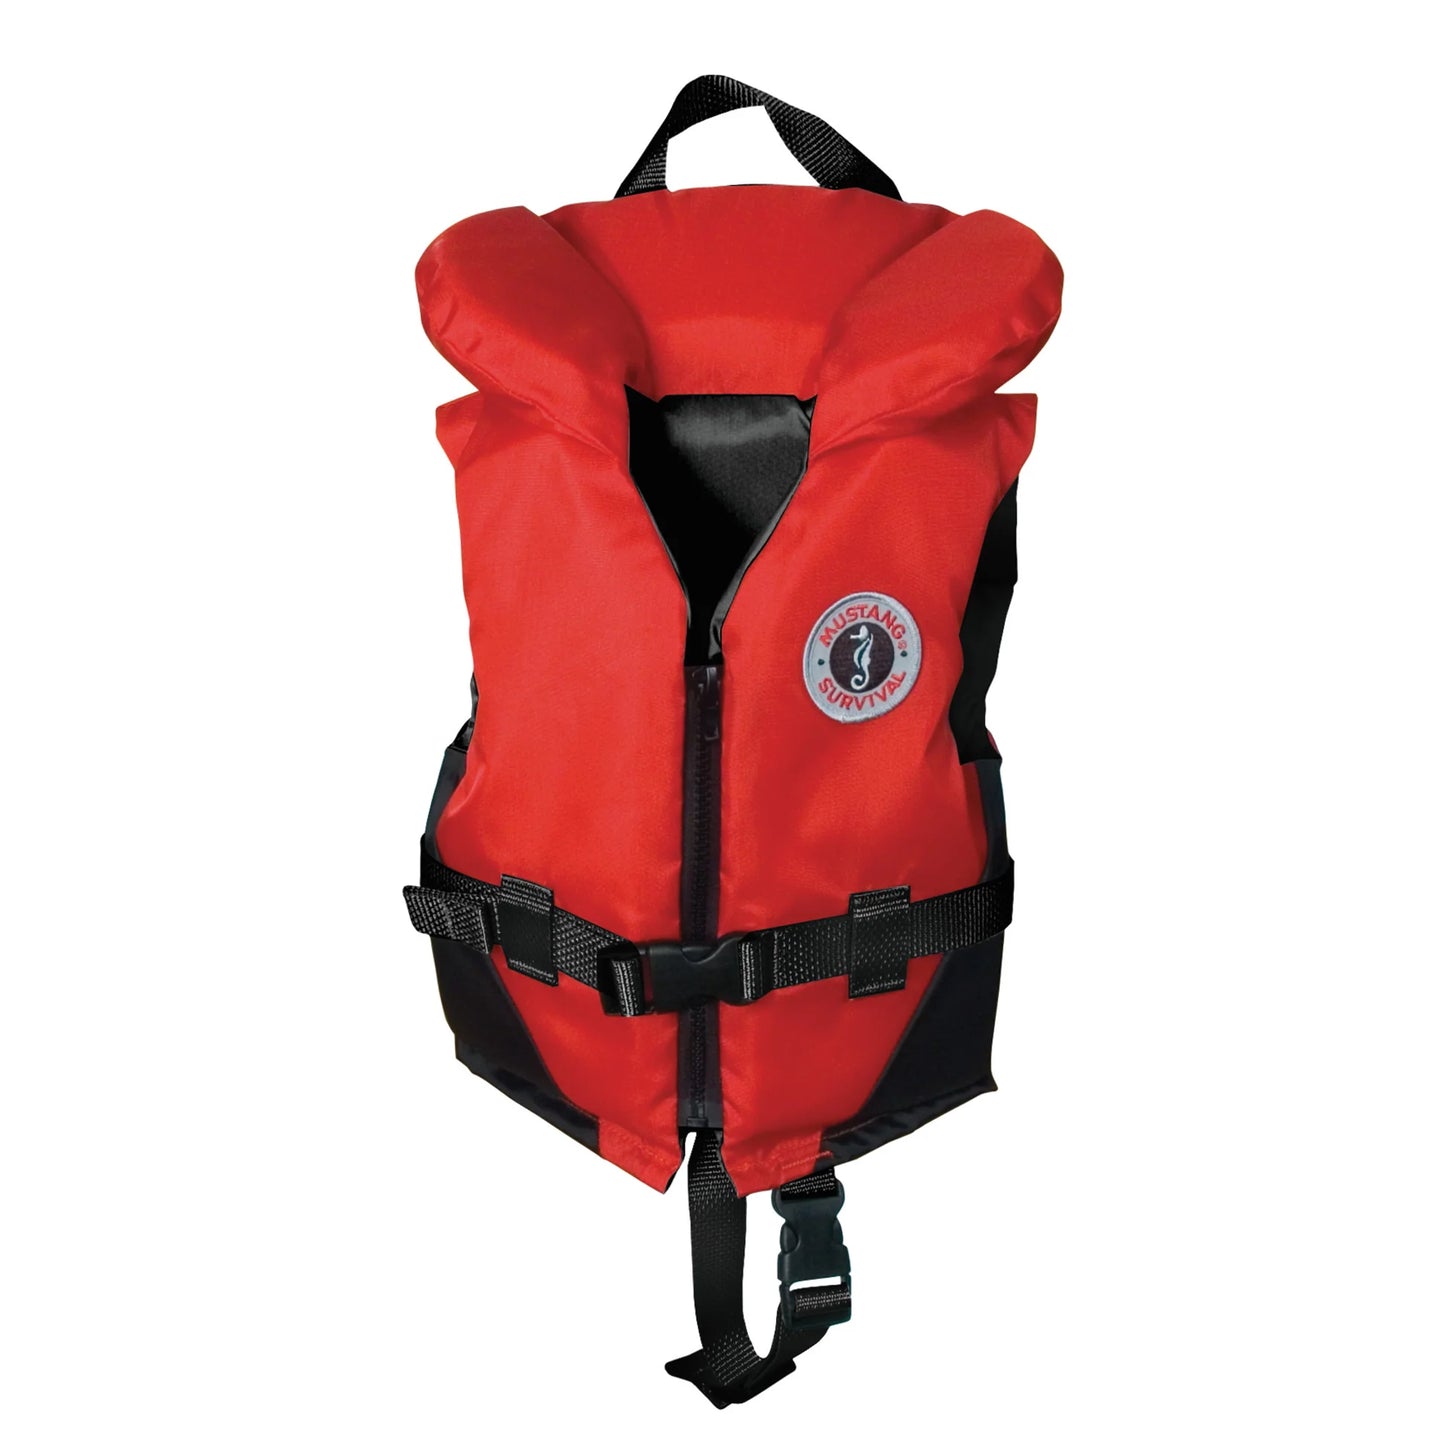 Mustang Survival Classic Infant PFD